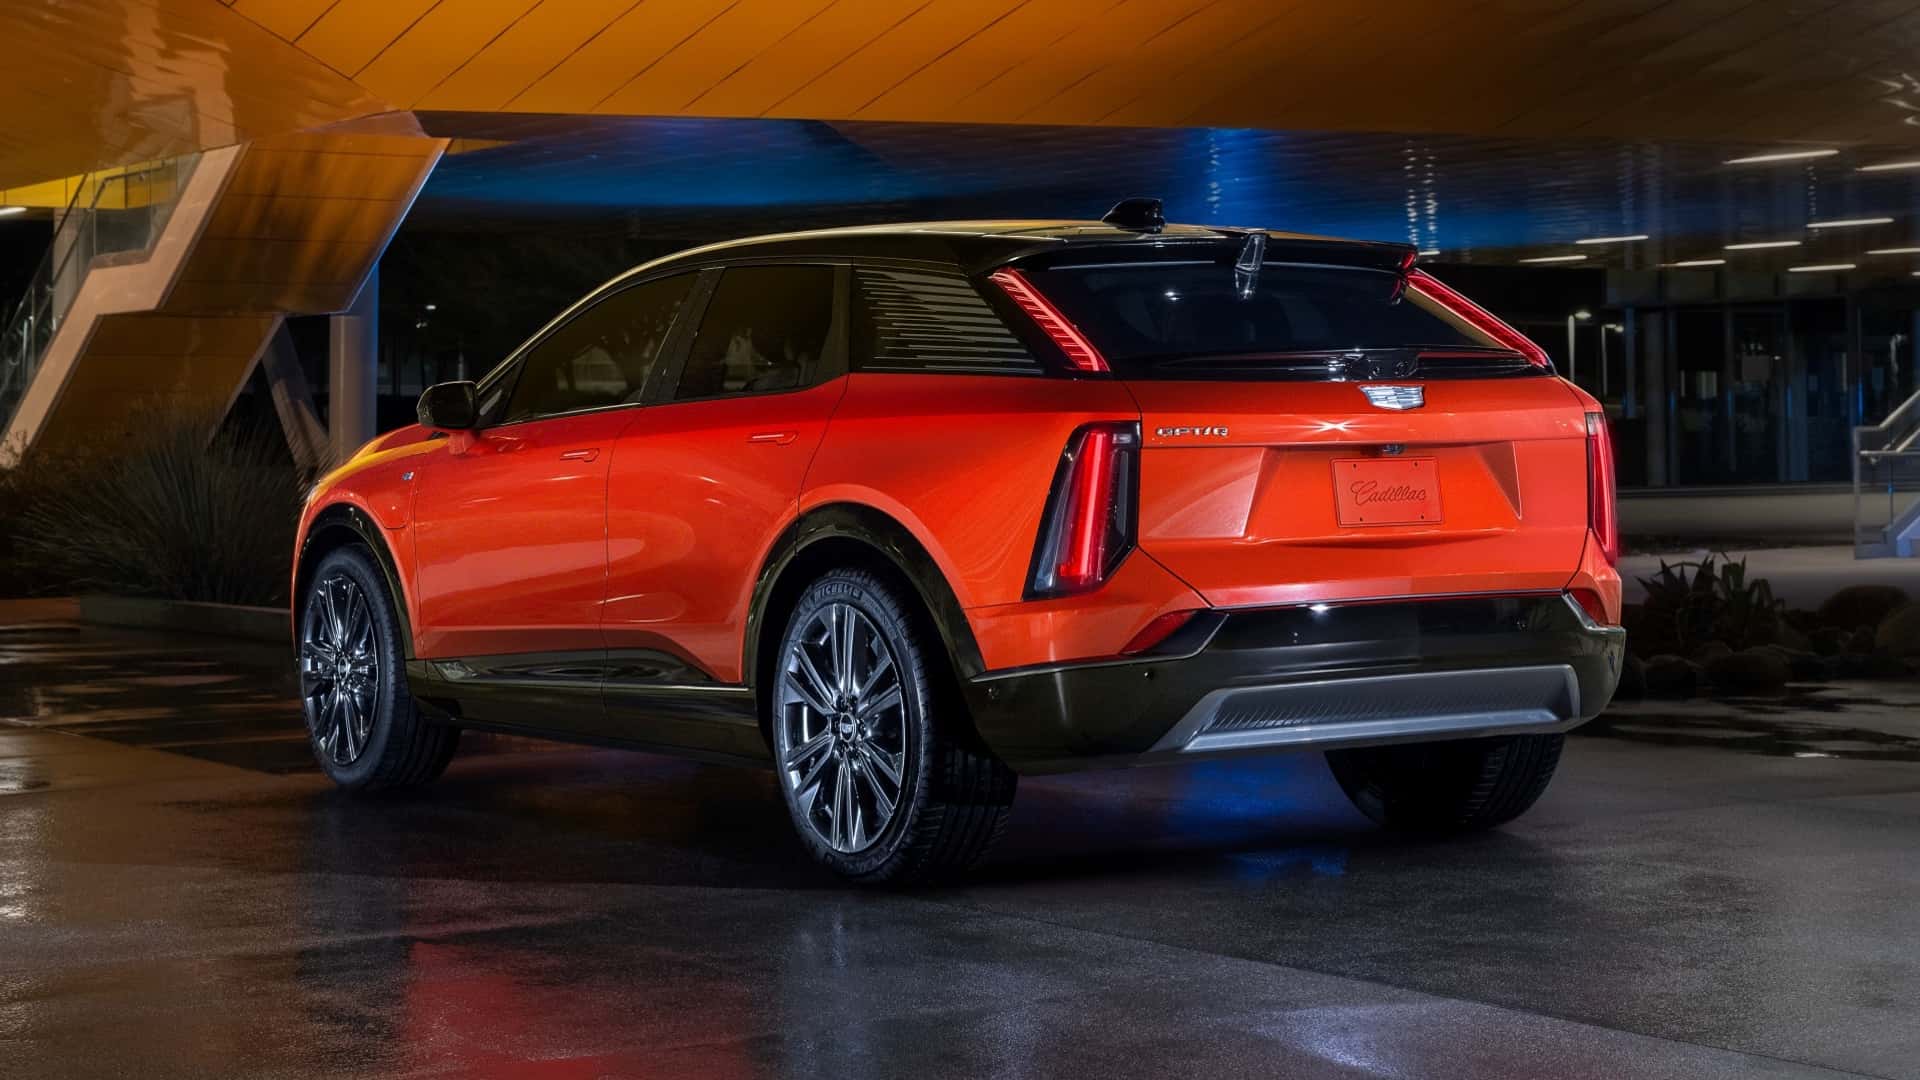 cadillac optiq electric luxury compact suv is the brand's entry ev